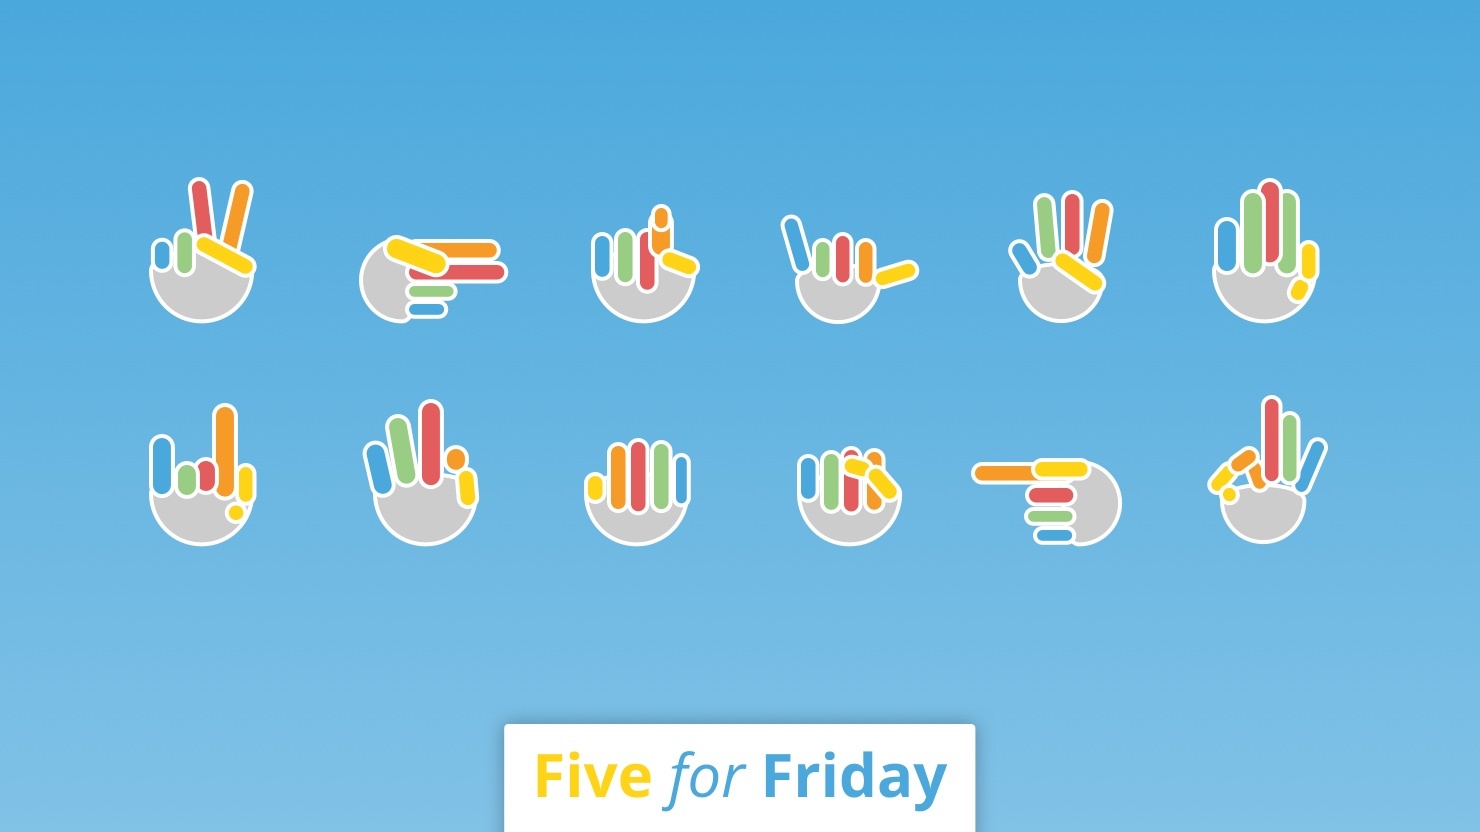 Five for Friday: Body language